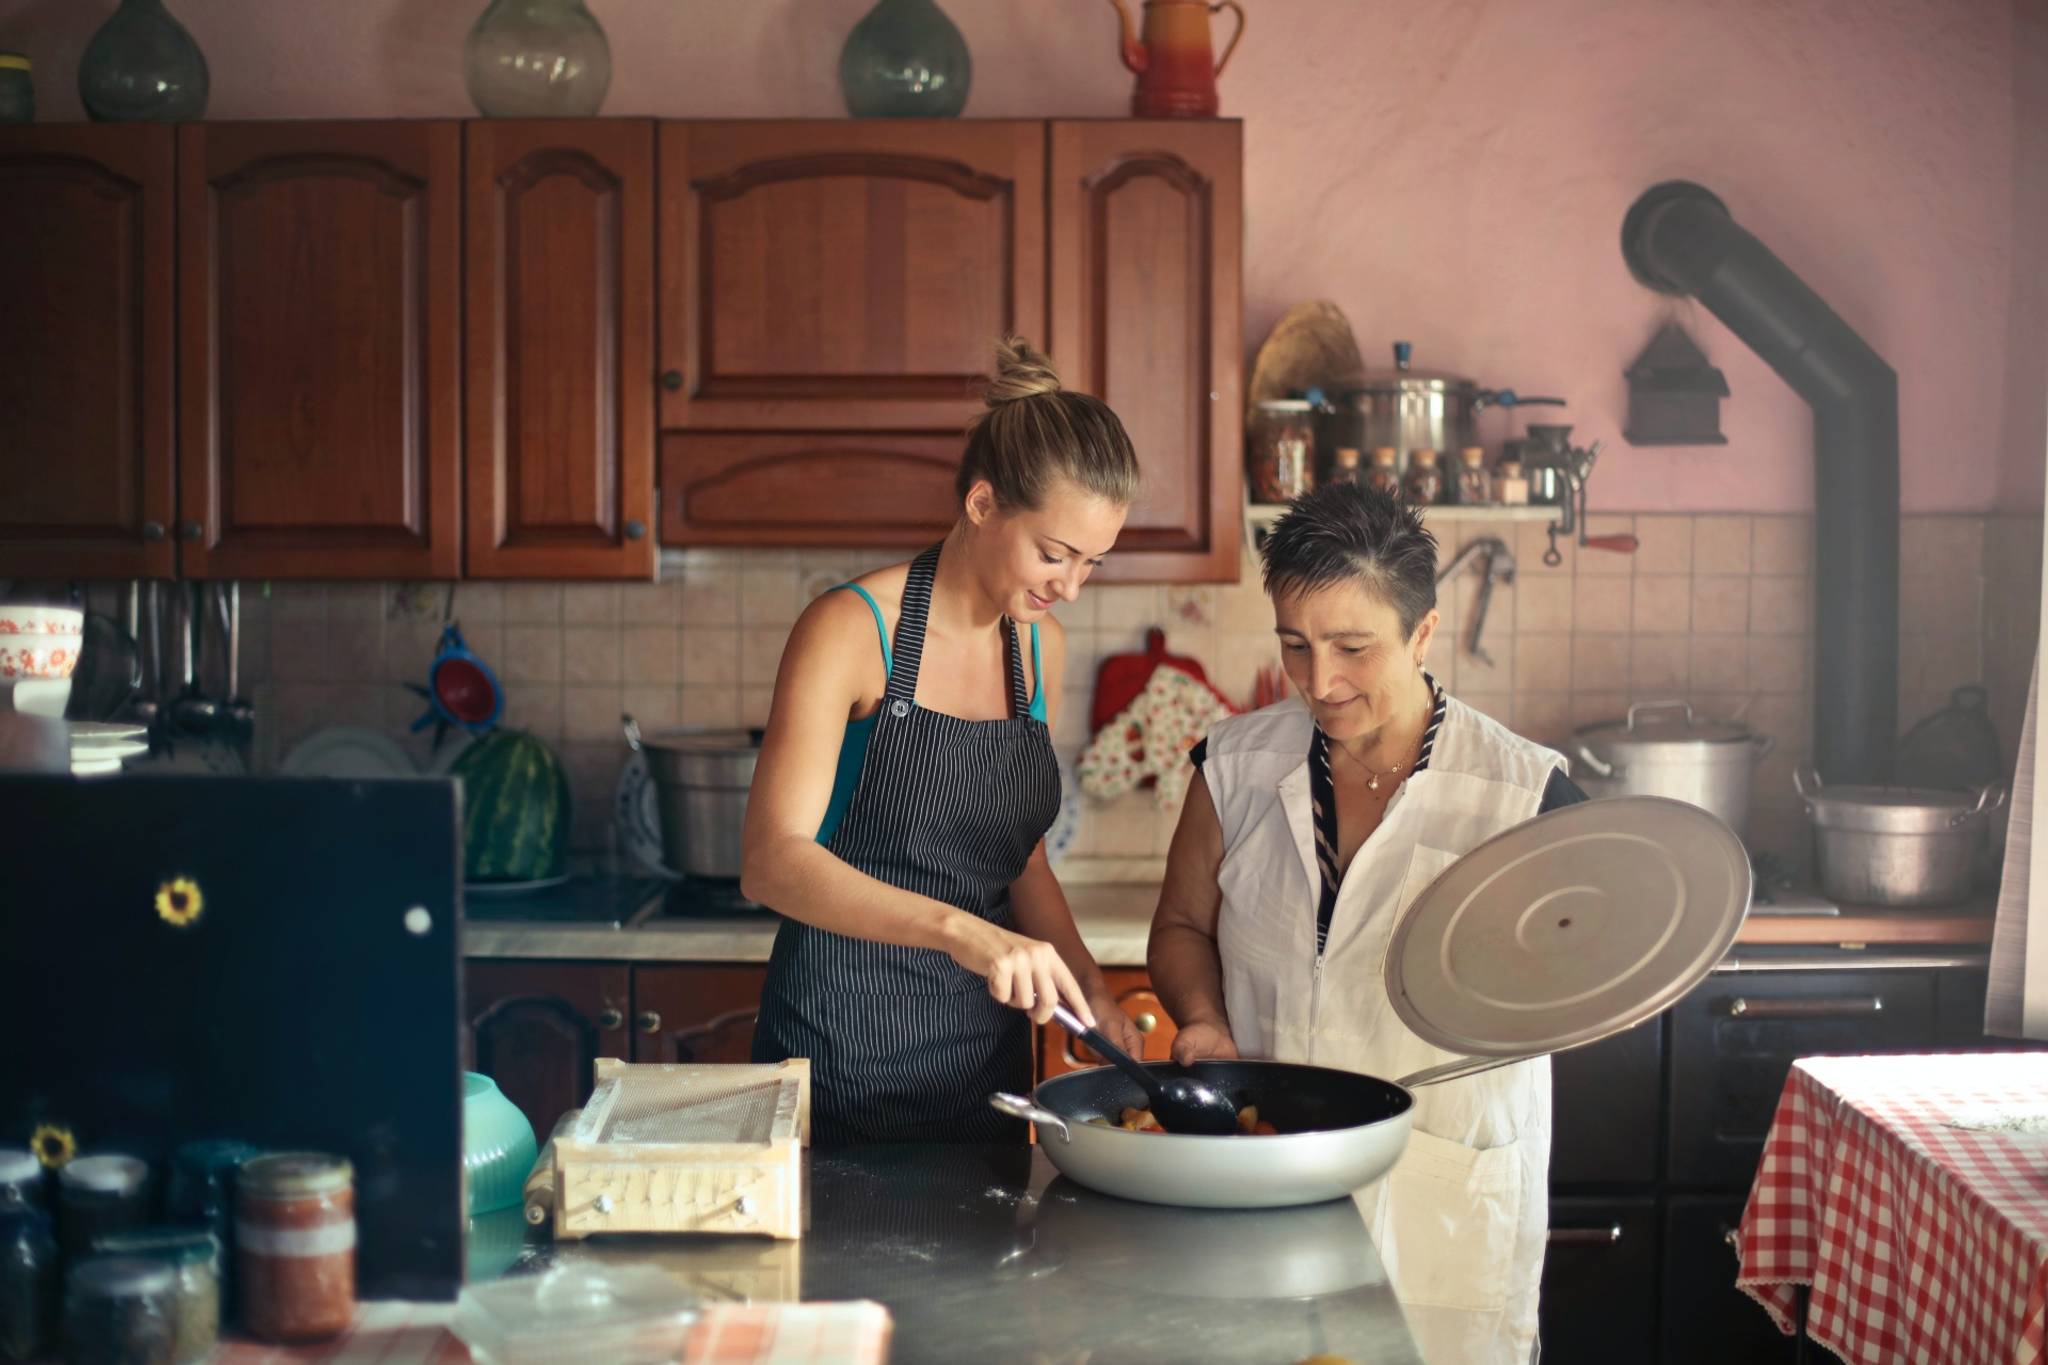 Home cooks are exploring new and niche brands